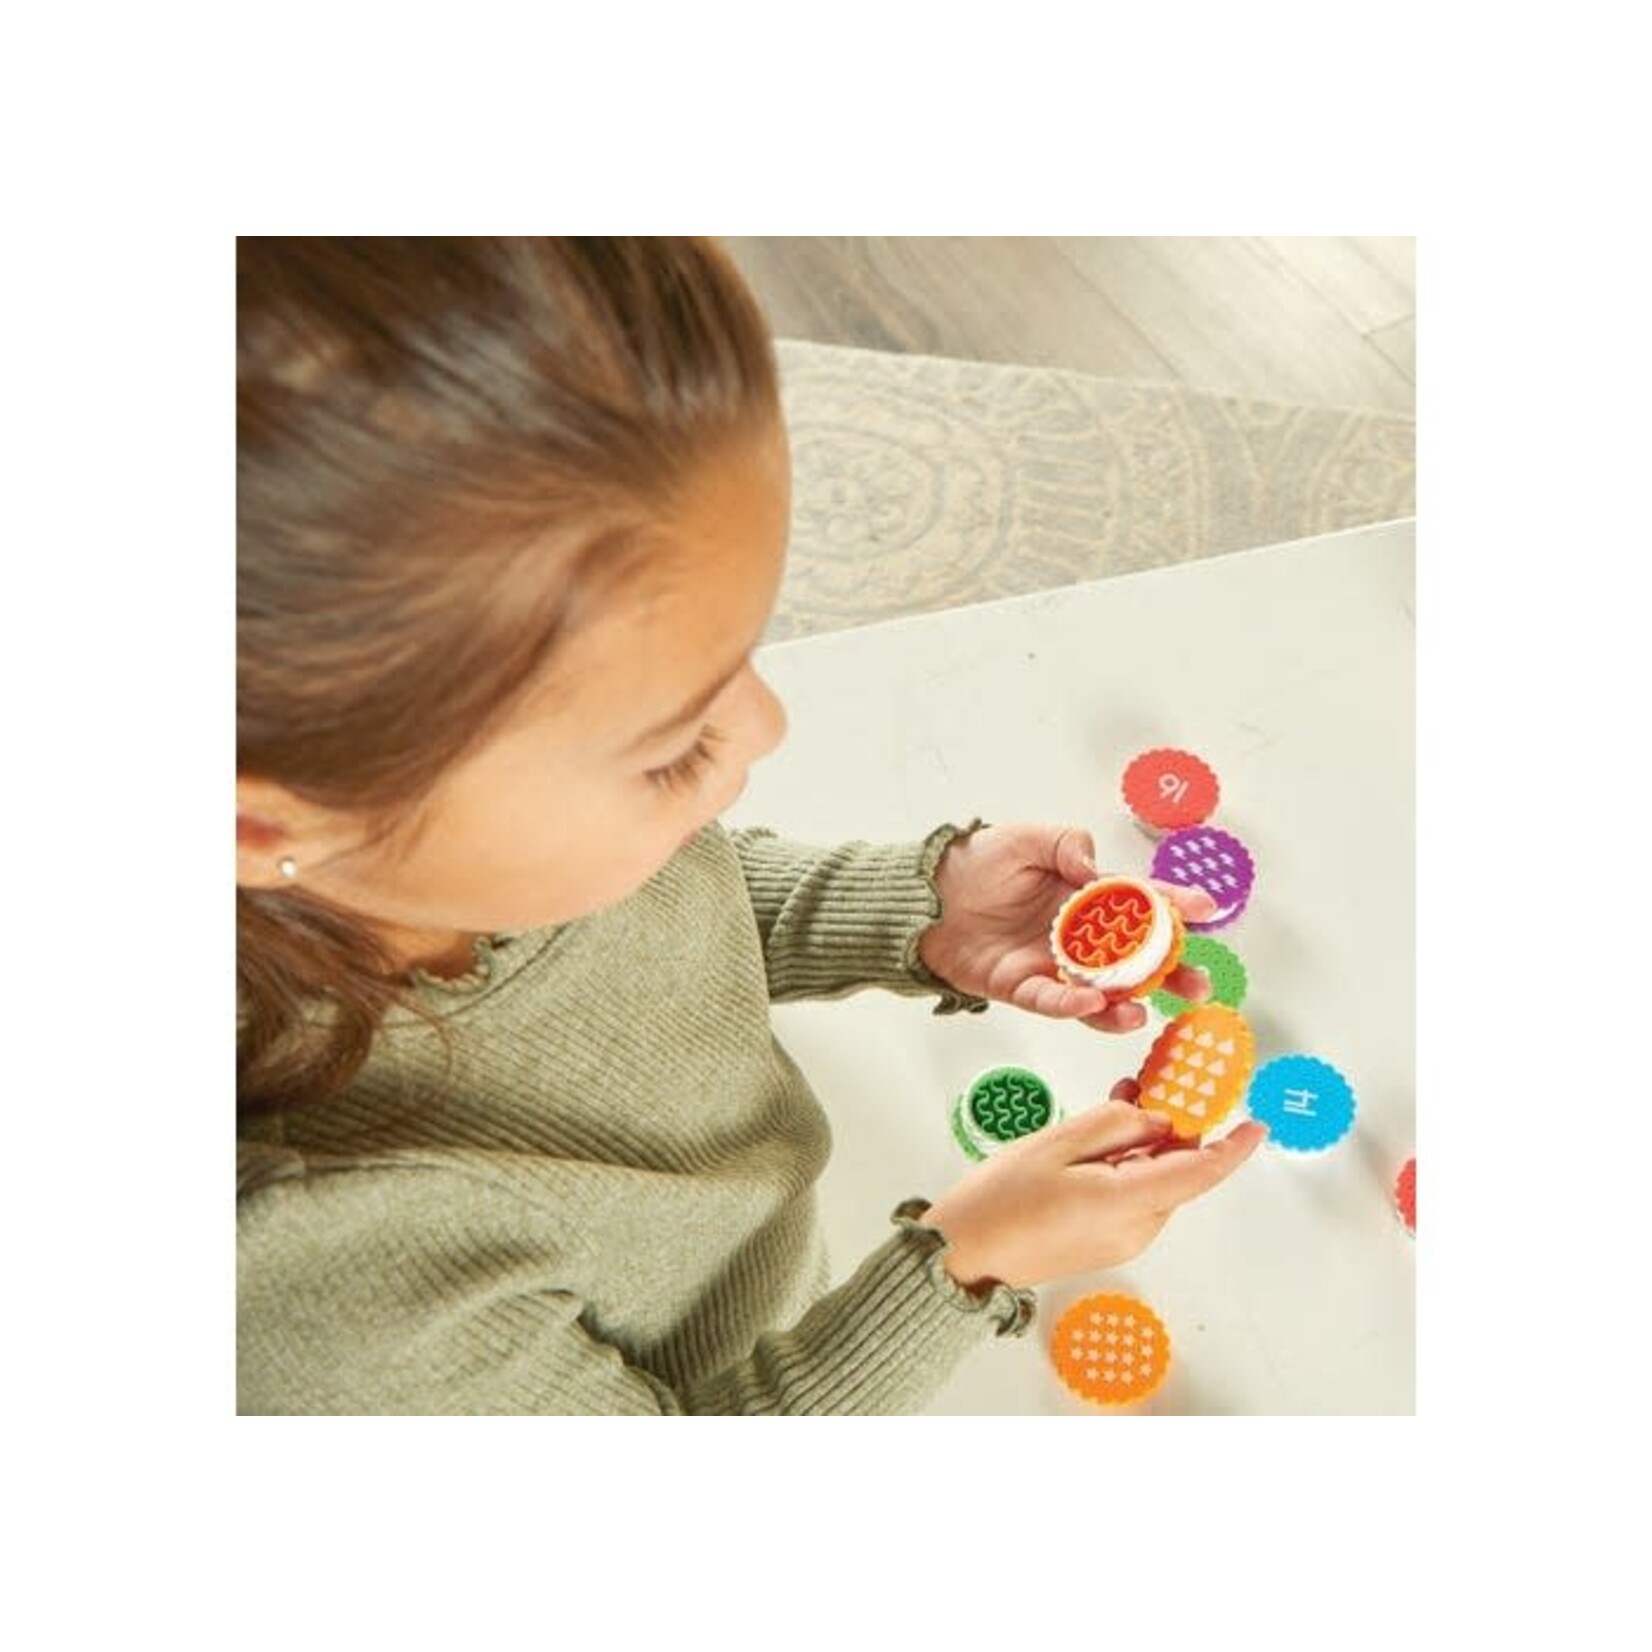 LEARNING RESOURCES INC Mini Number Treats